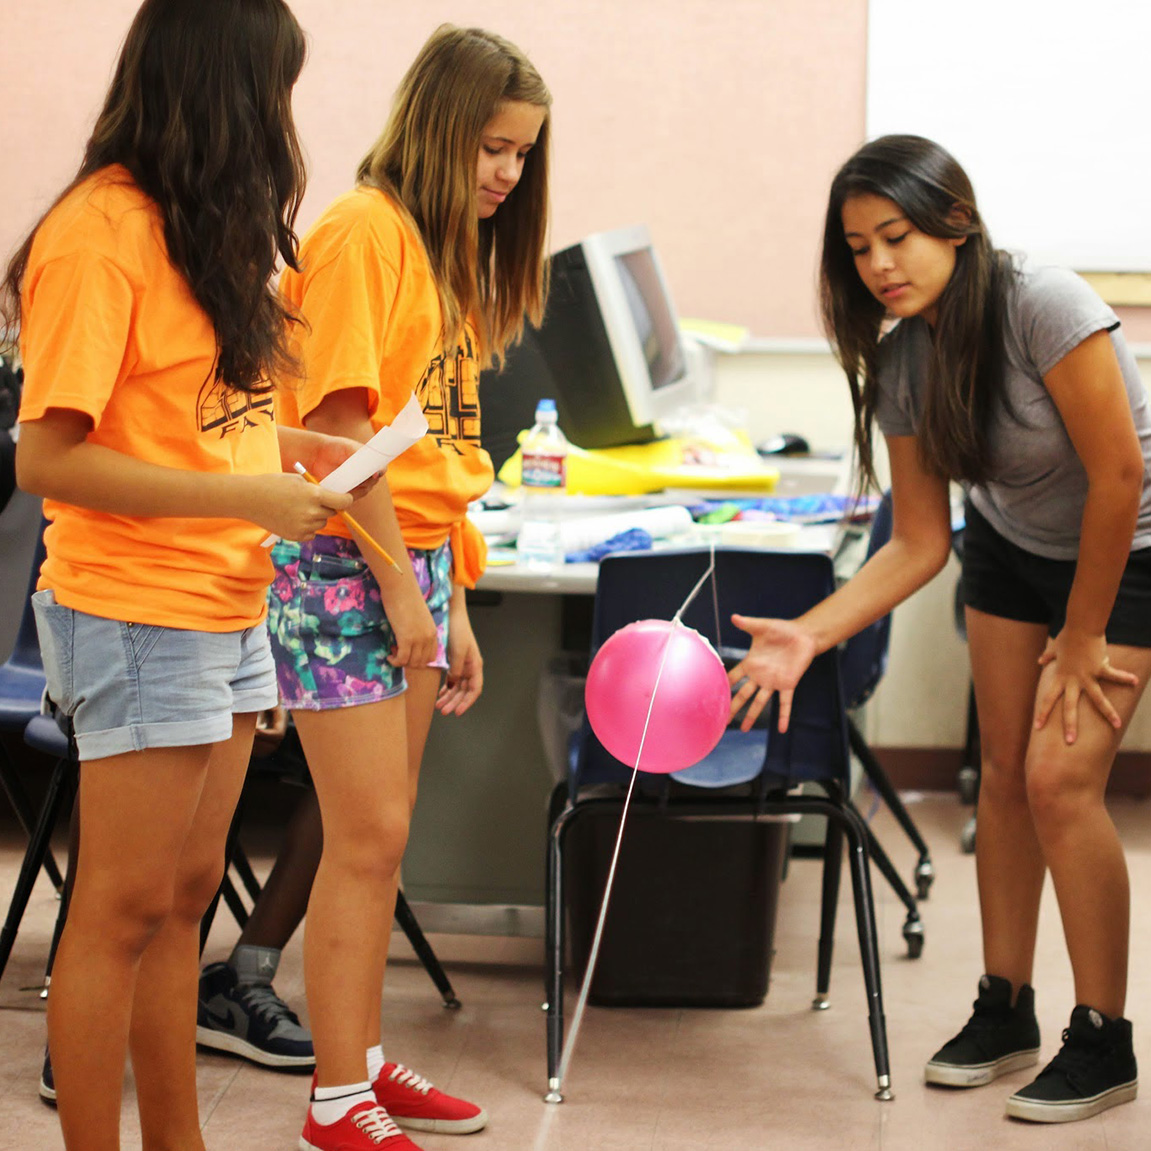 Three students, with two, wearing matching orange t-shirts and one wearing a gray t-shirt, participating in an activity with a pink balloon moving along a string.